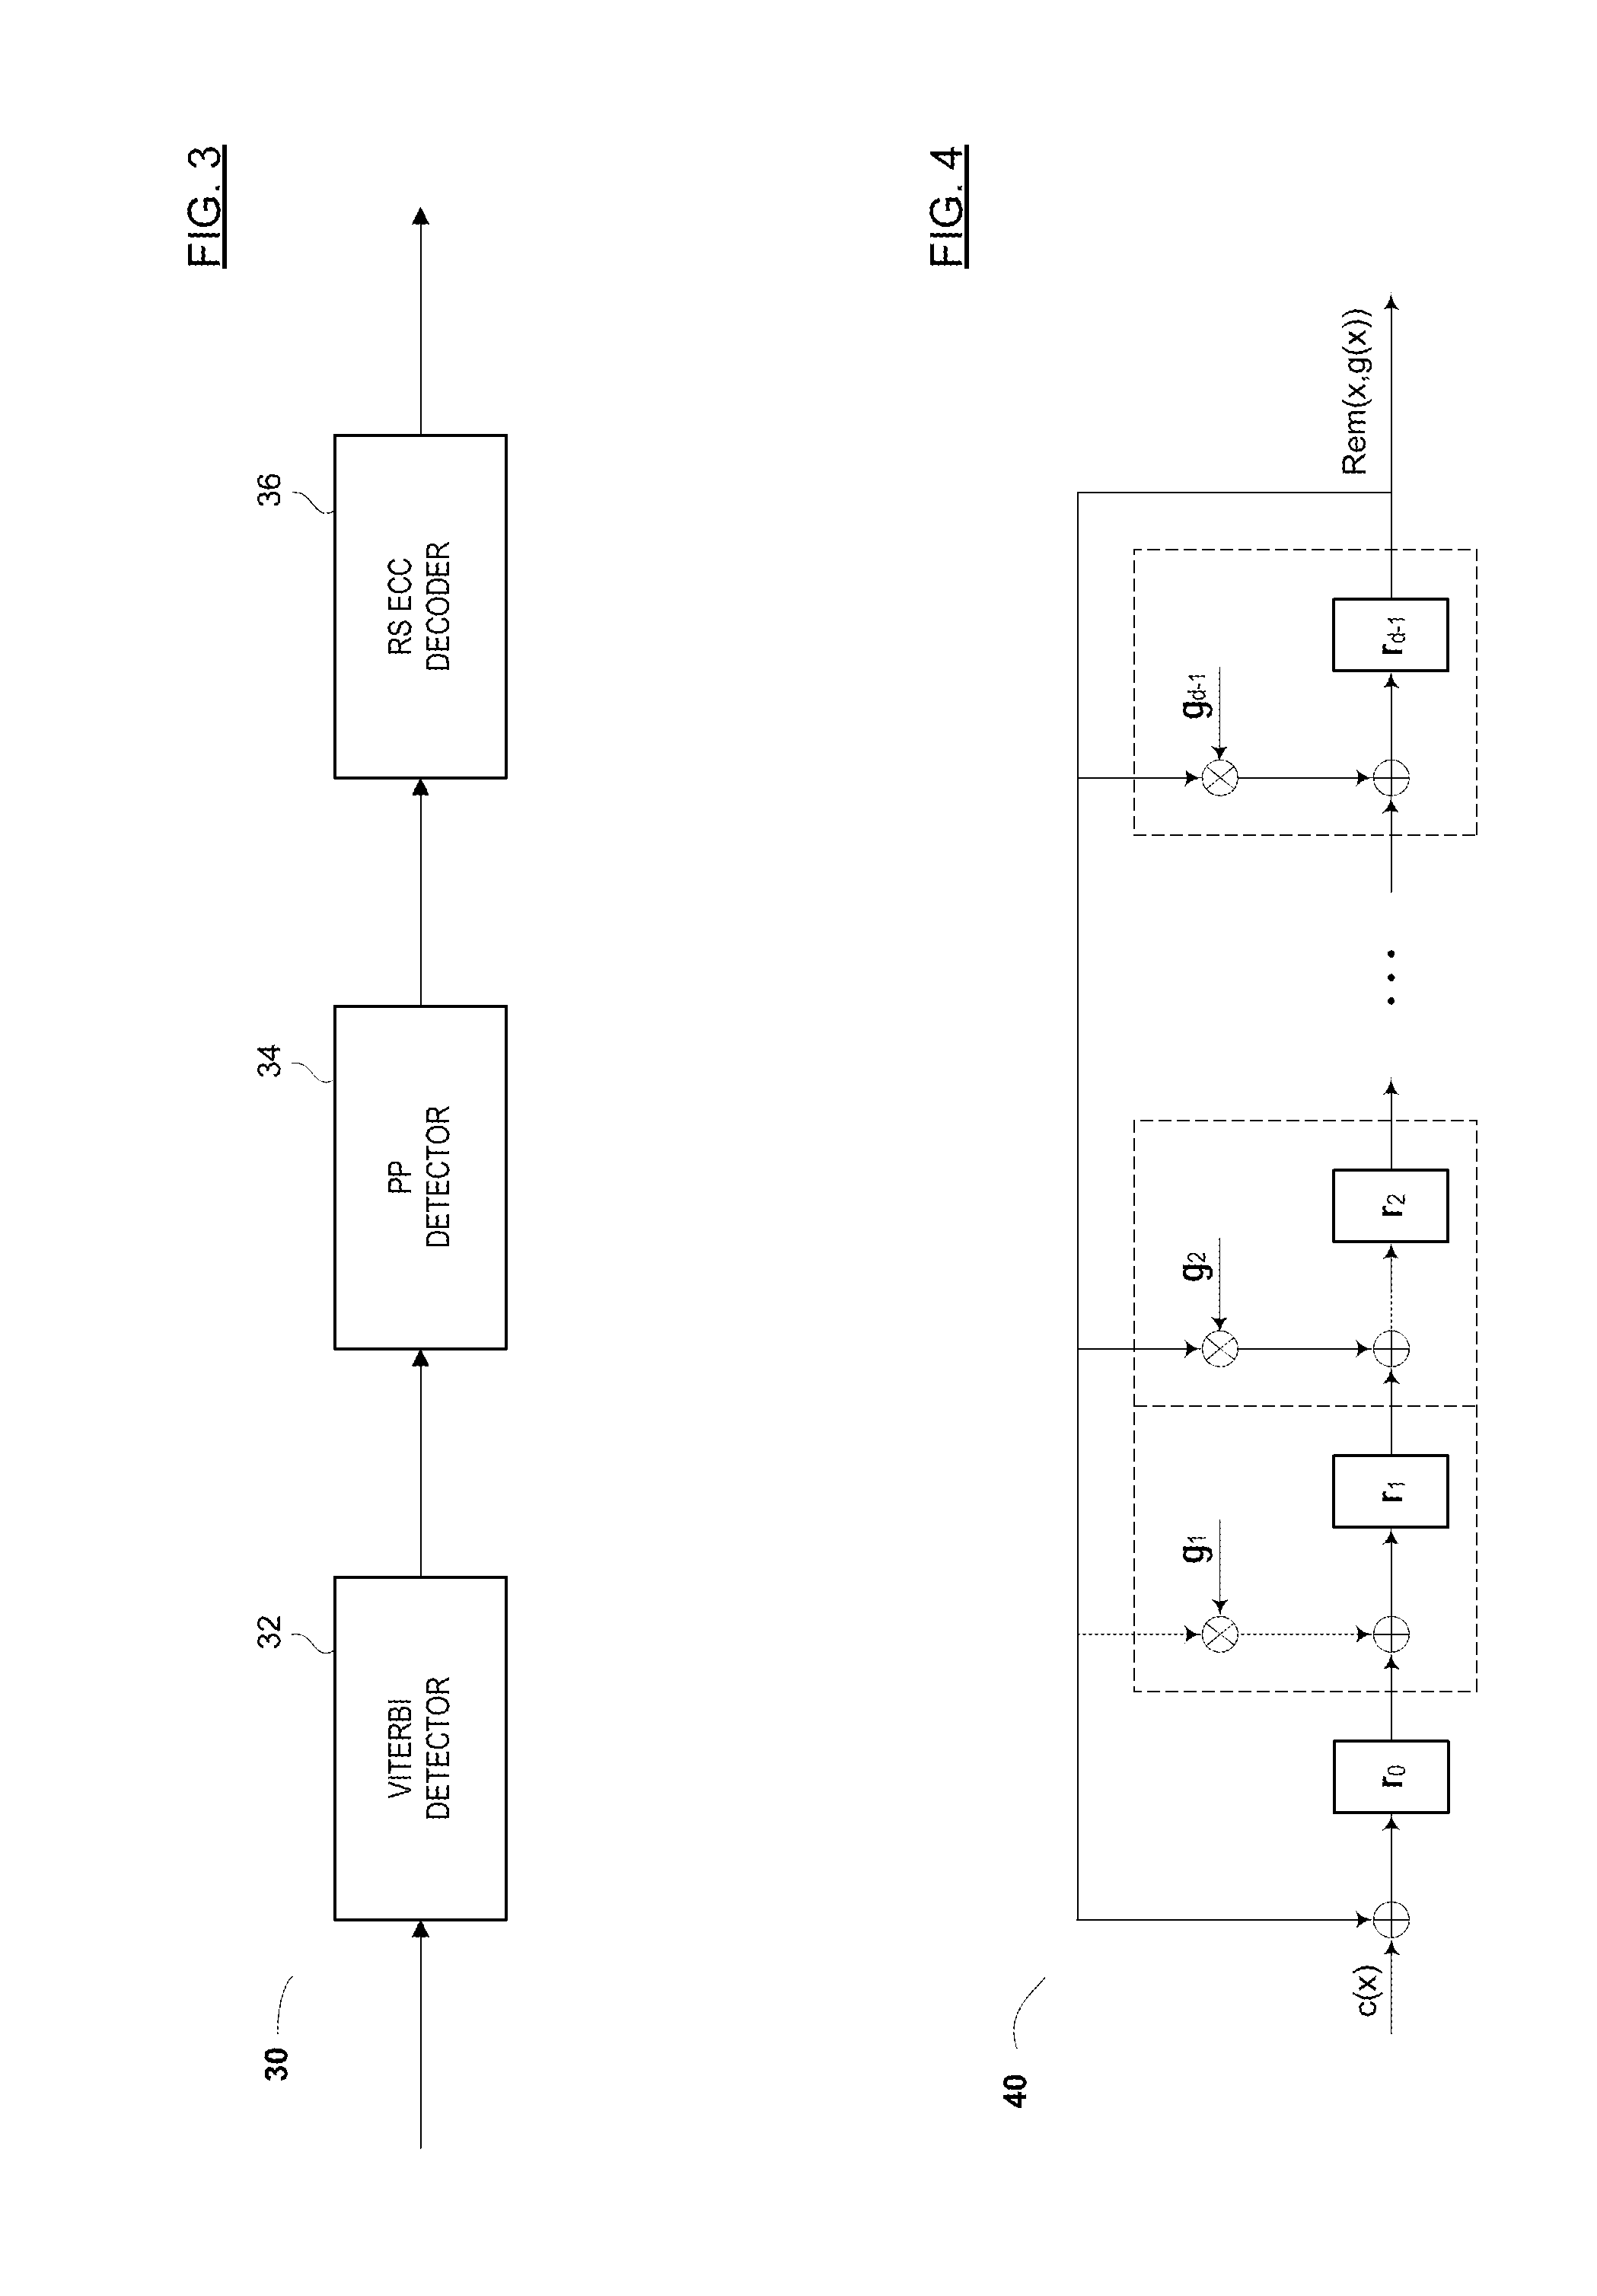 Methods and algorithms for joint channel-code decoding of linear block codes